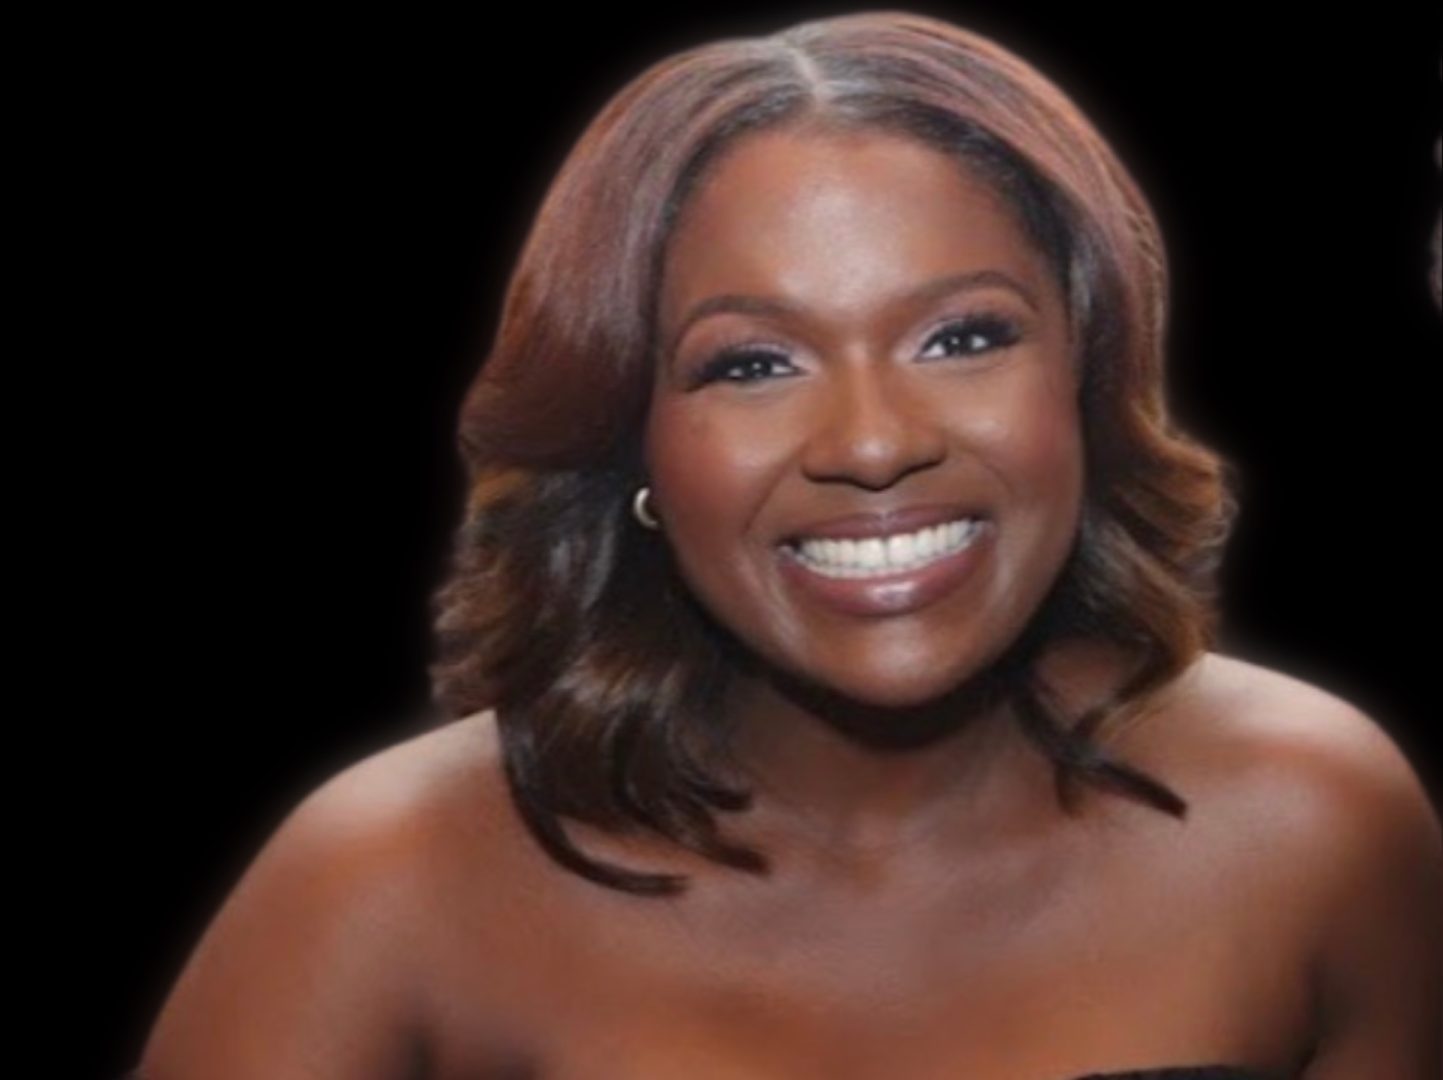 Deborah Joy Winans shares the excitement of being a sister with superpowers